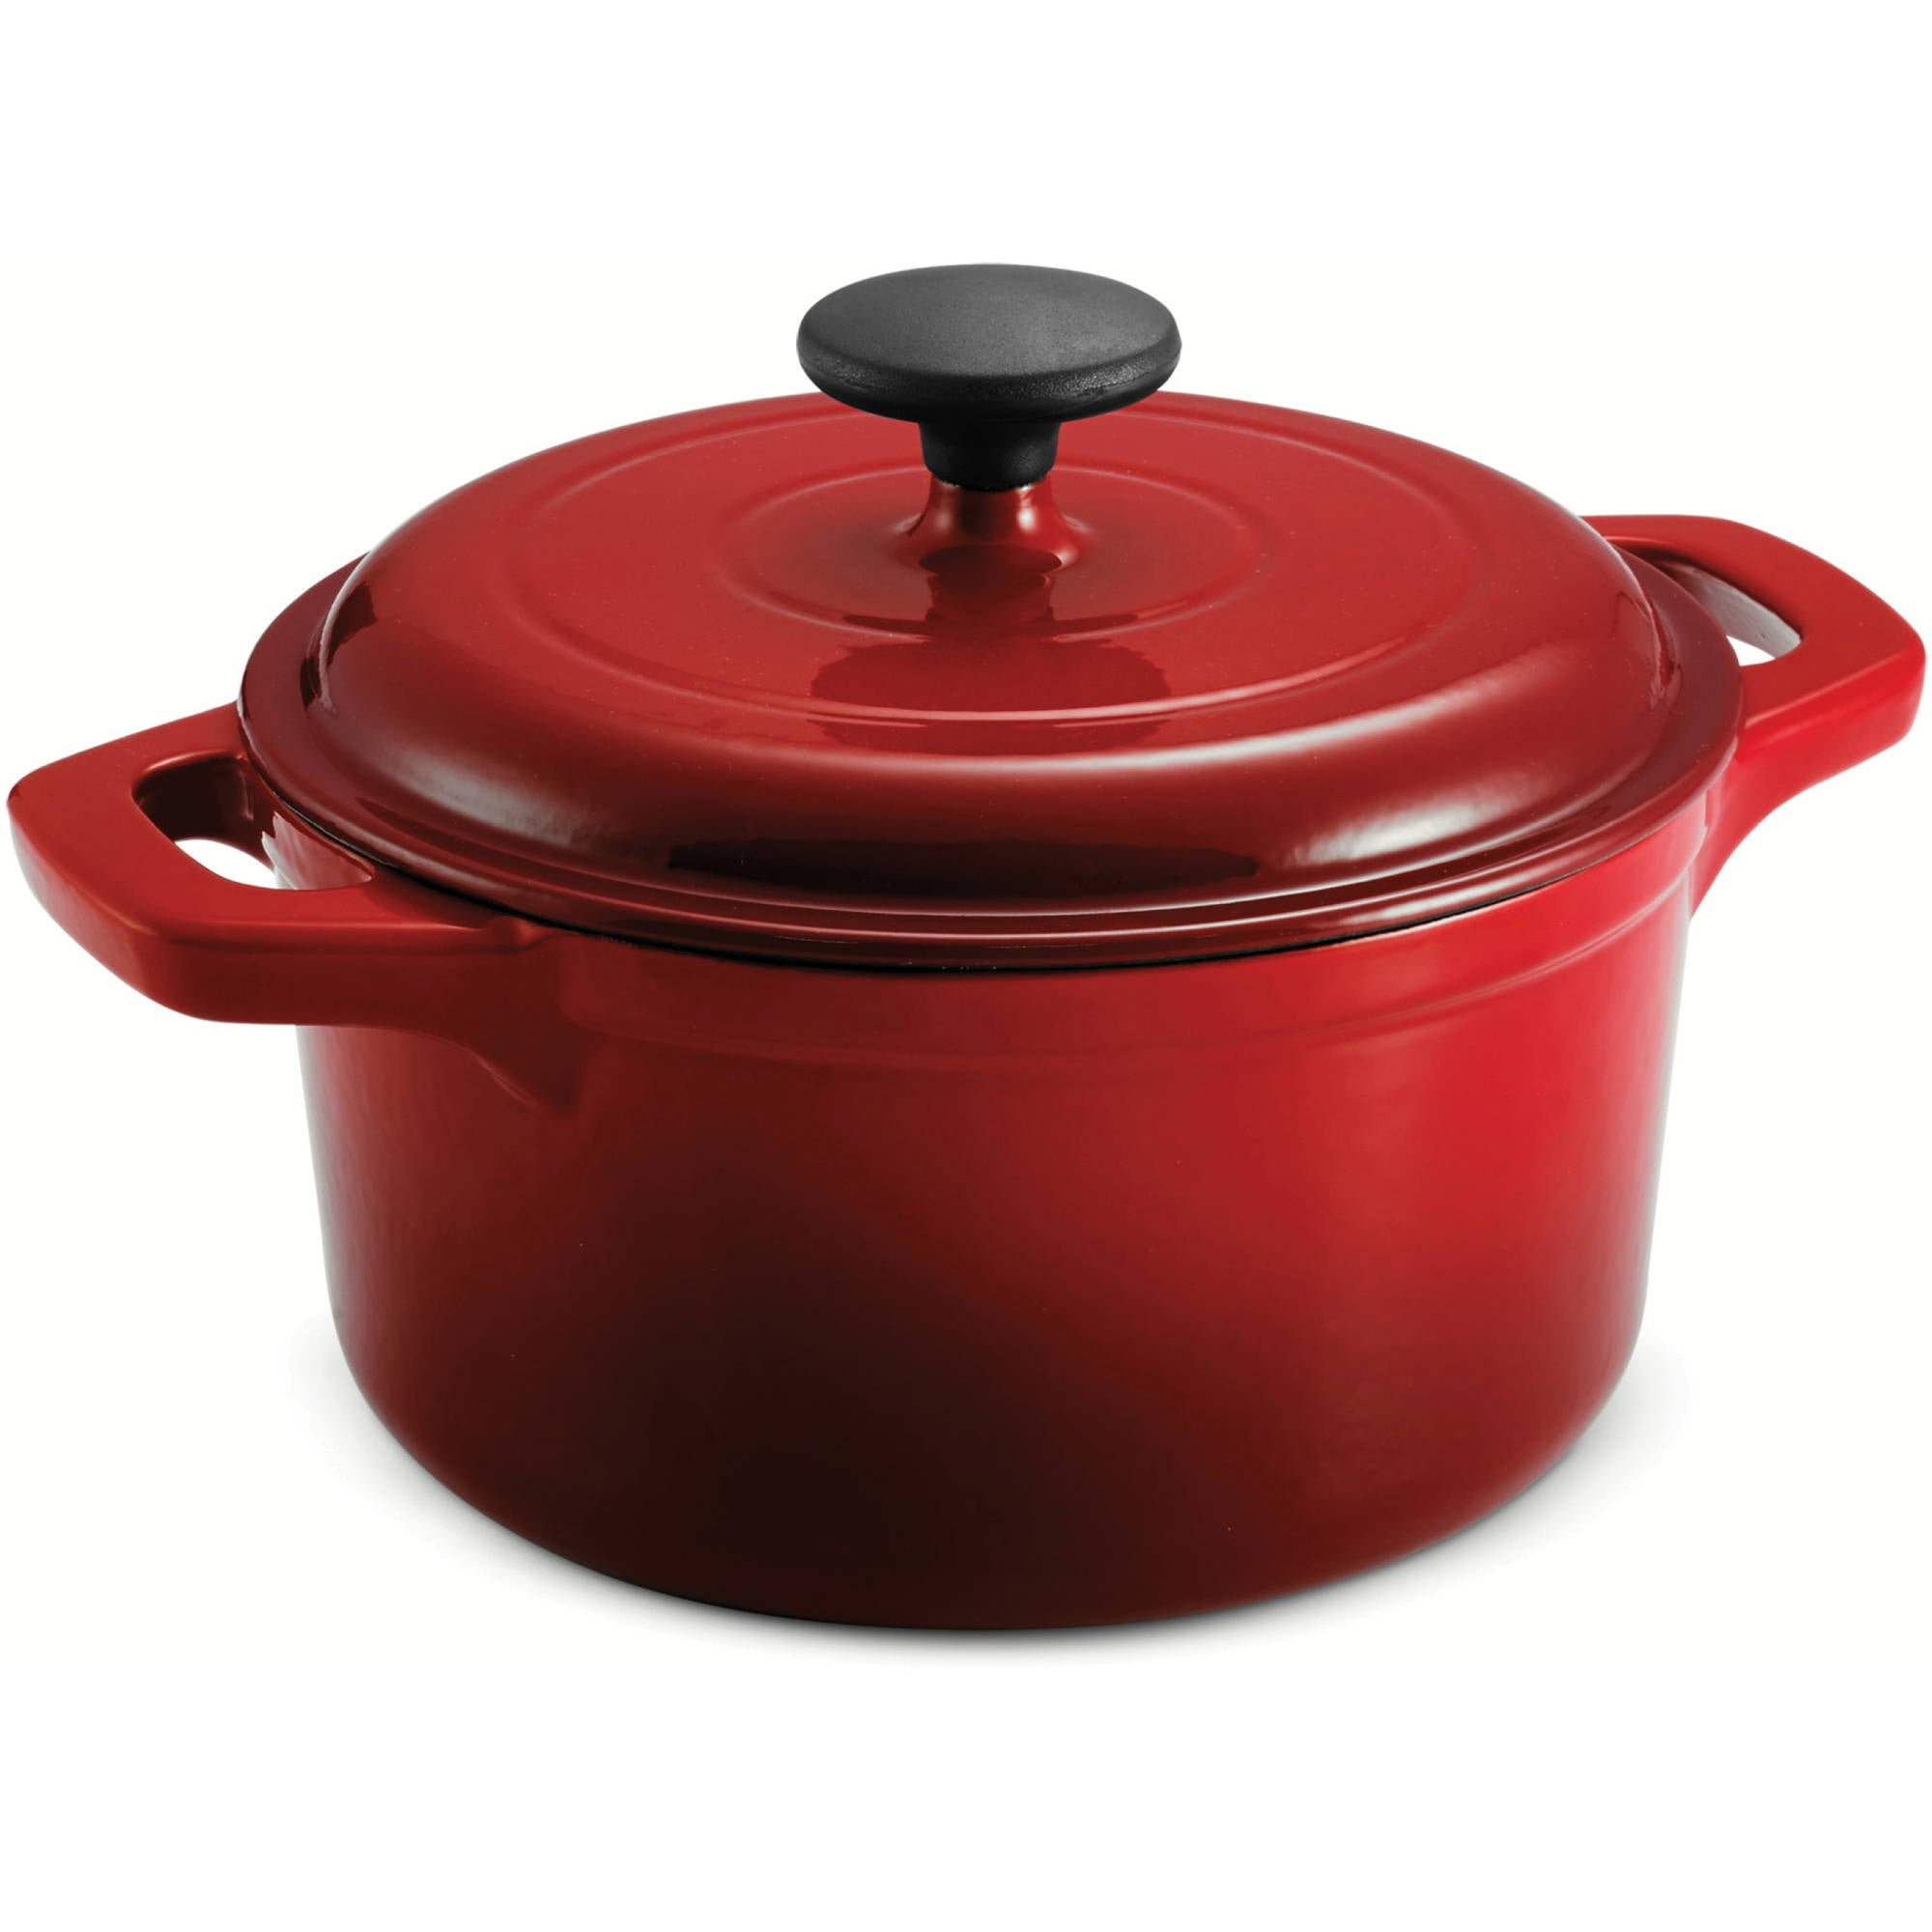 TRAMONTINA 6.5 Qt ROUND Dutch Oven OMBRE RED Enameled Cast Iron